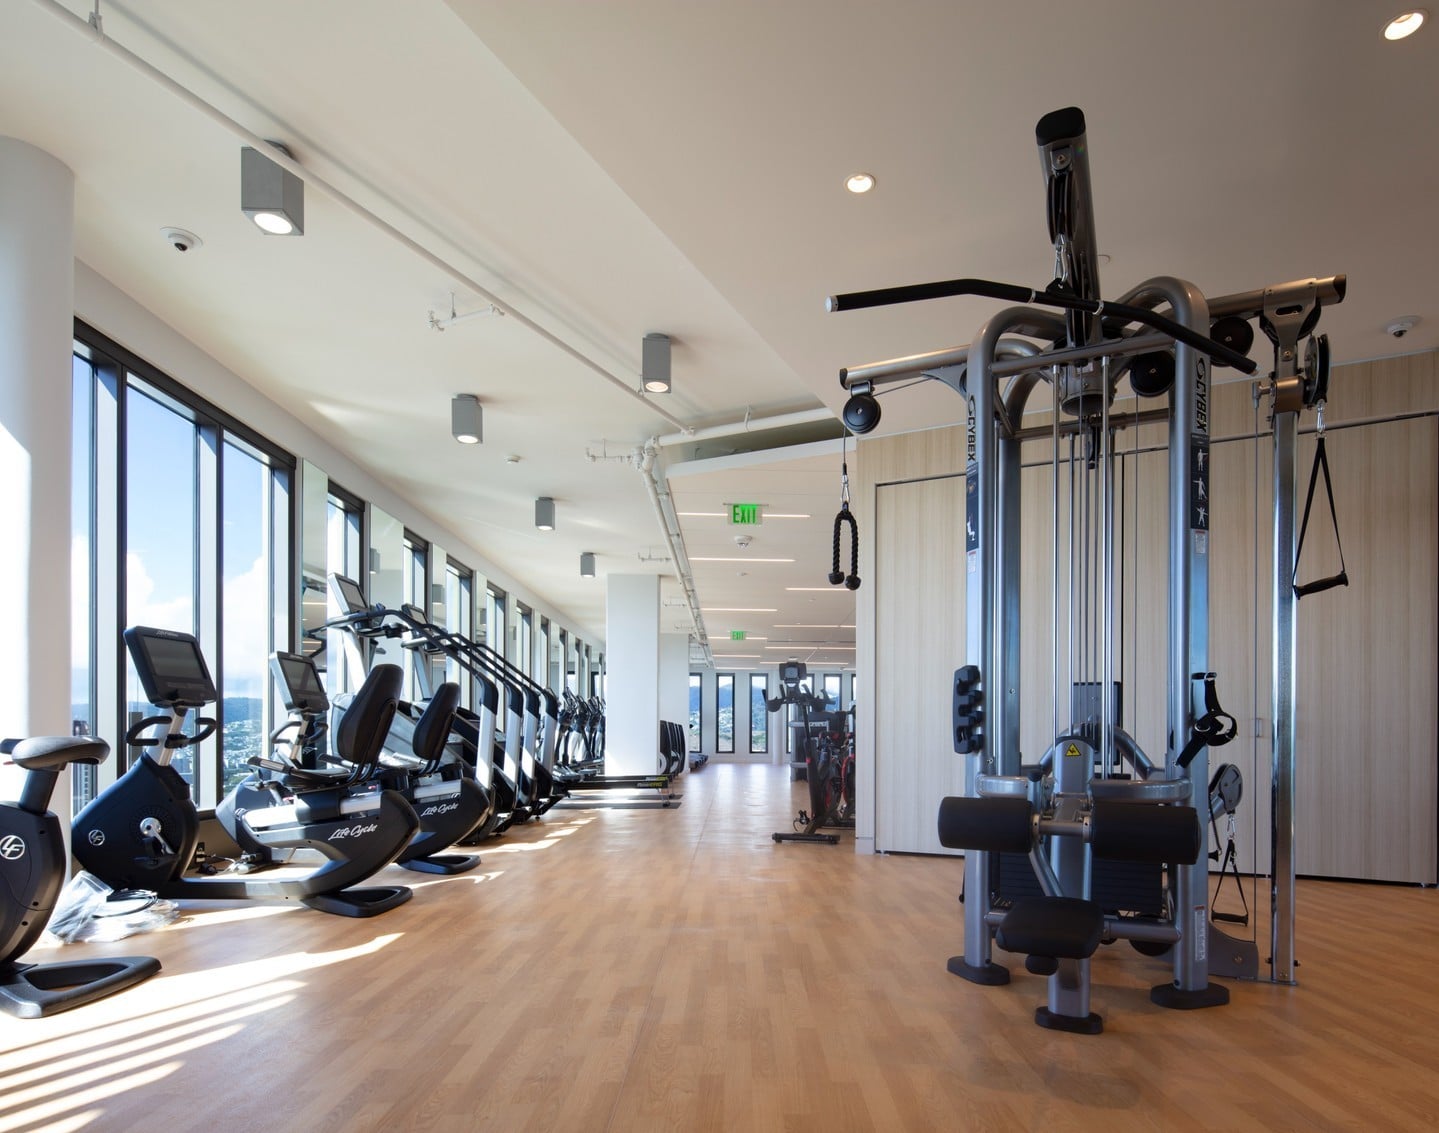 Discover ʻAʻaliʻi’s fitness room set 400 feet above the sea with panoramic ocean views. Learn more about the one-of-a-kind amenities and ʻAʻaliʻi lifestyle at the link in our bio.